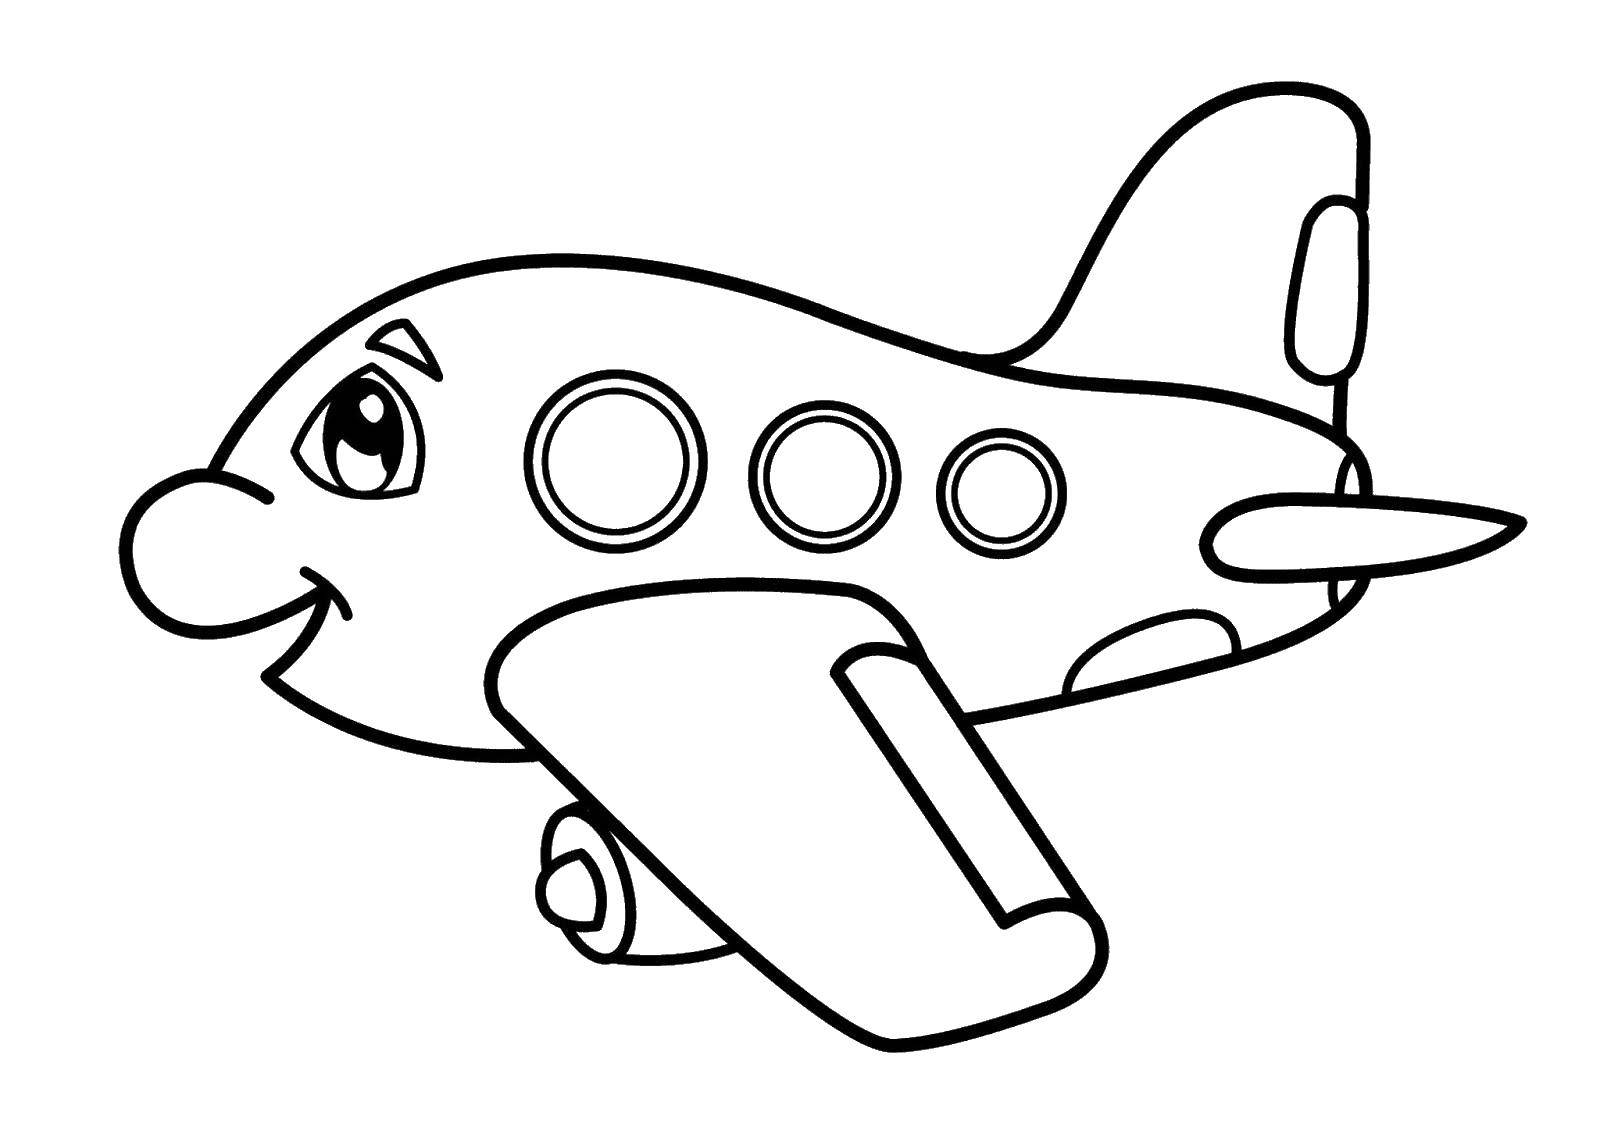 Coloring Cute airplane. Category The planes. Tags:  Plane.